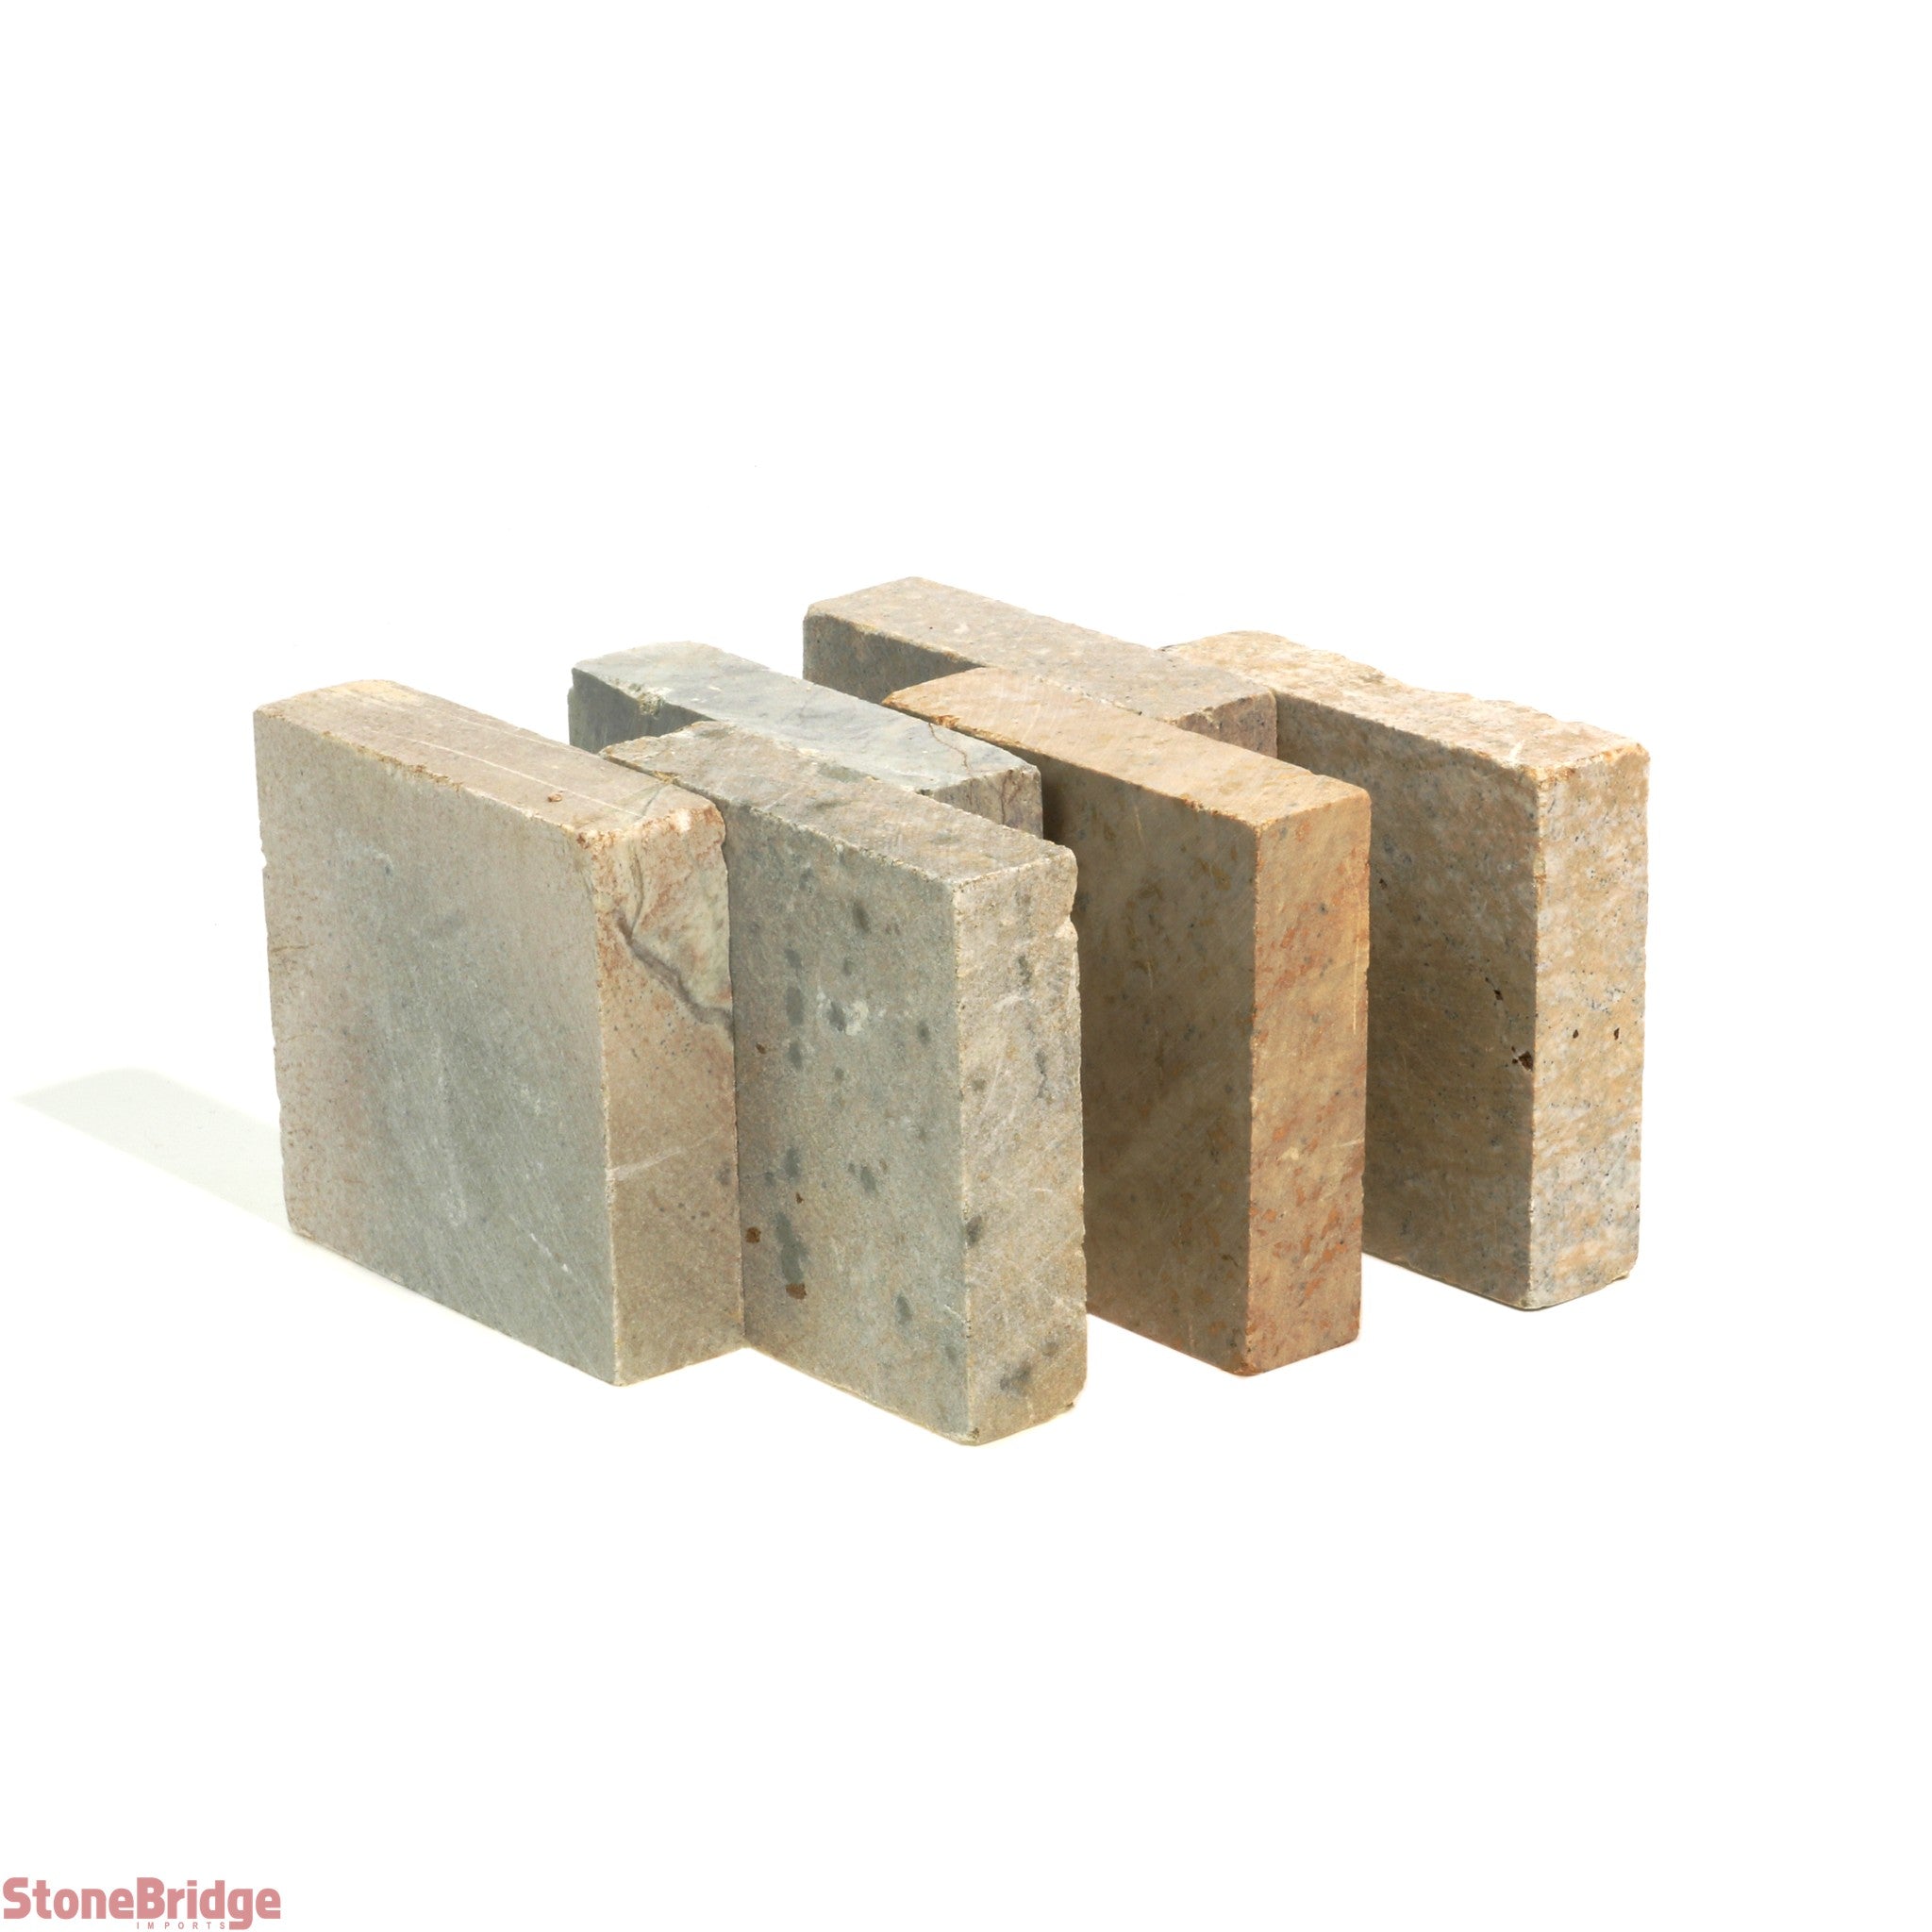 Soapstone Block for Carving - 6 Pack